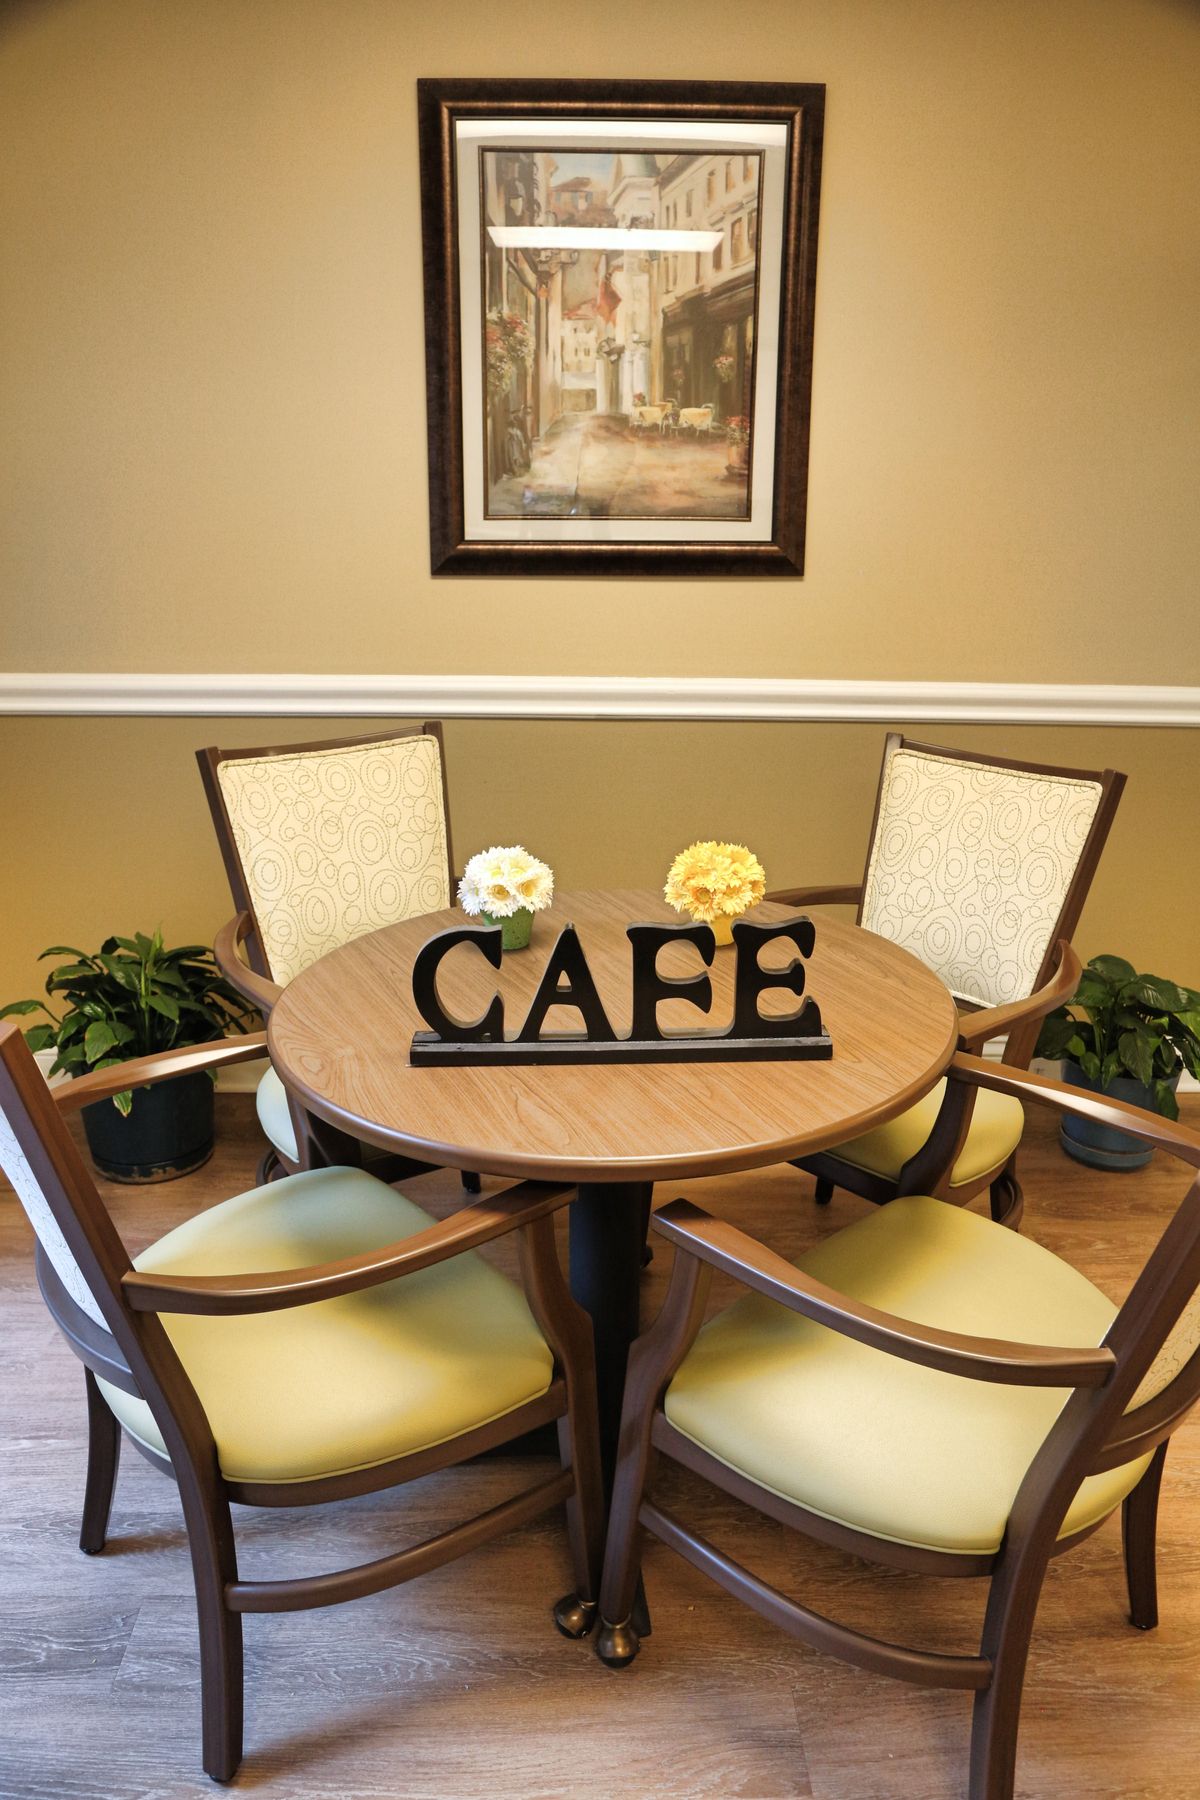 Senior living community Heritage Oaks' architectural building with indoor dining room, furniture, and art.